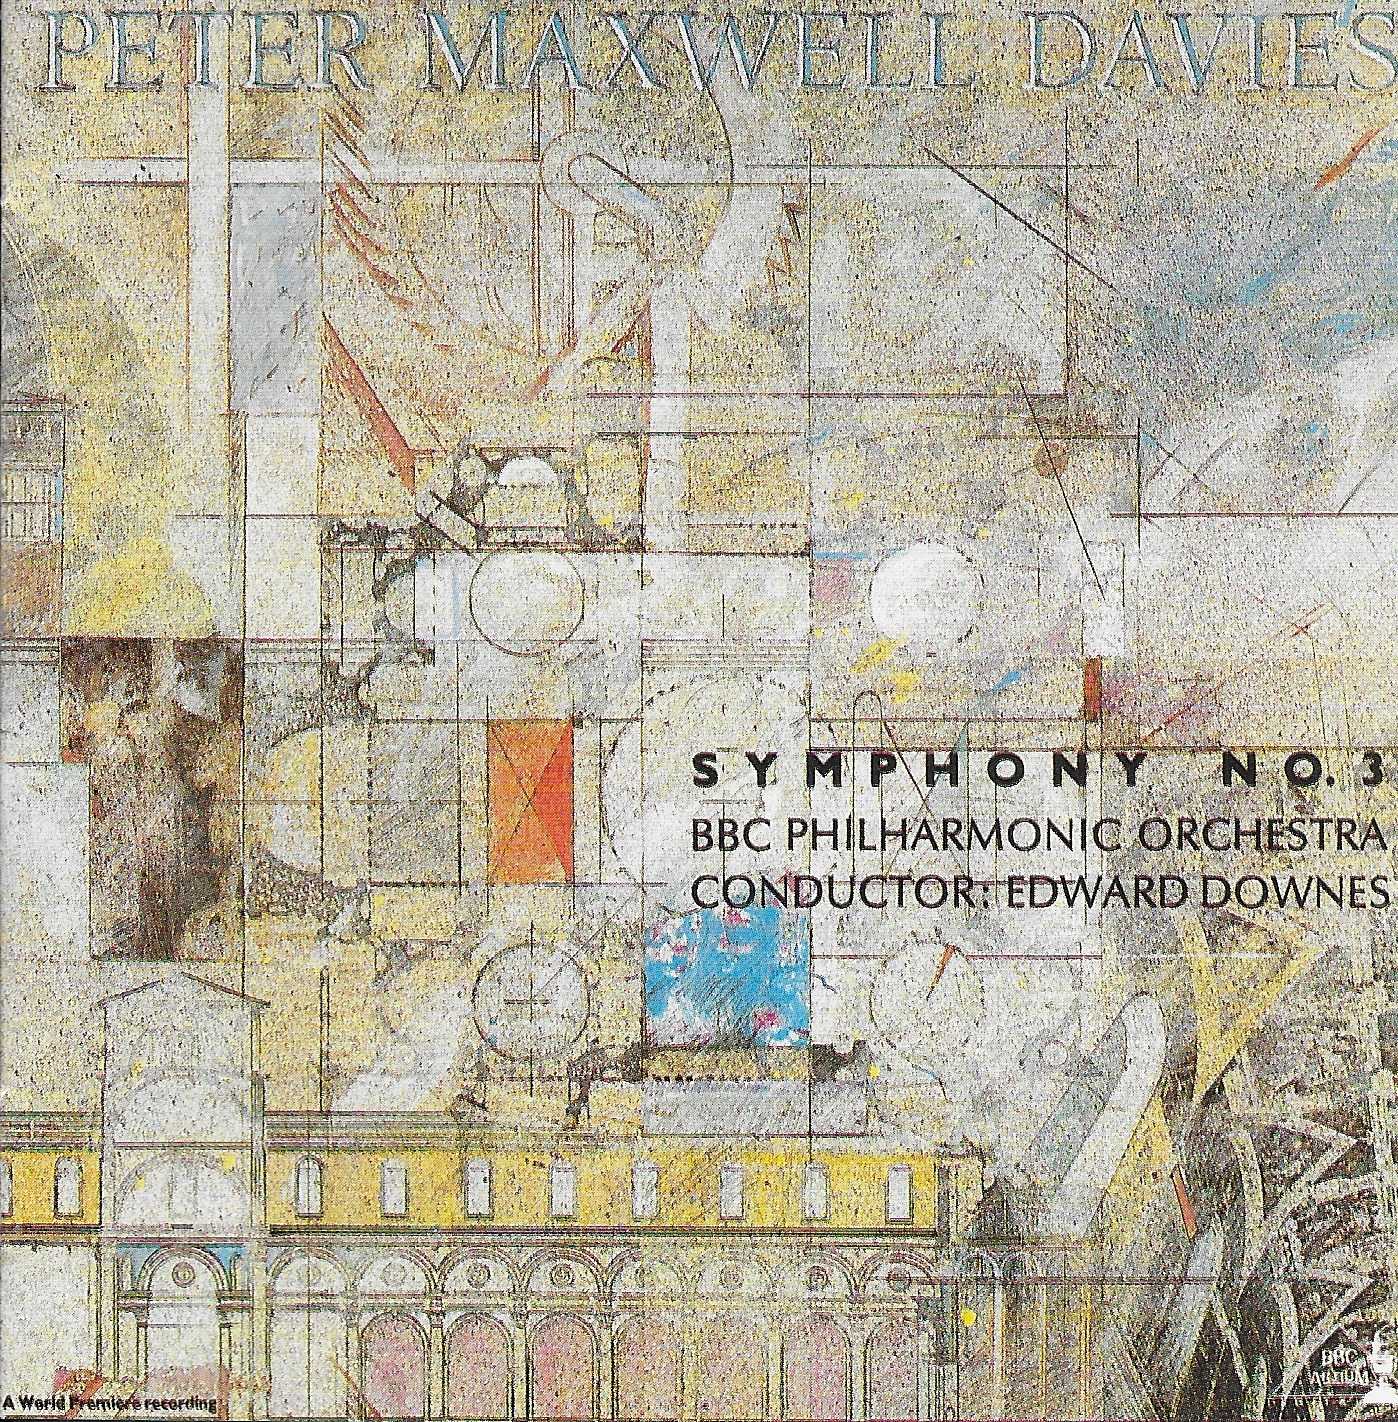 Picture of BBCCD560 X Peter Maxwell Davies - Symphony no. 3 by artist Peter Maxwell Davies from the BBC cds - Records and Tapes library